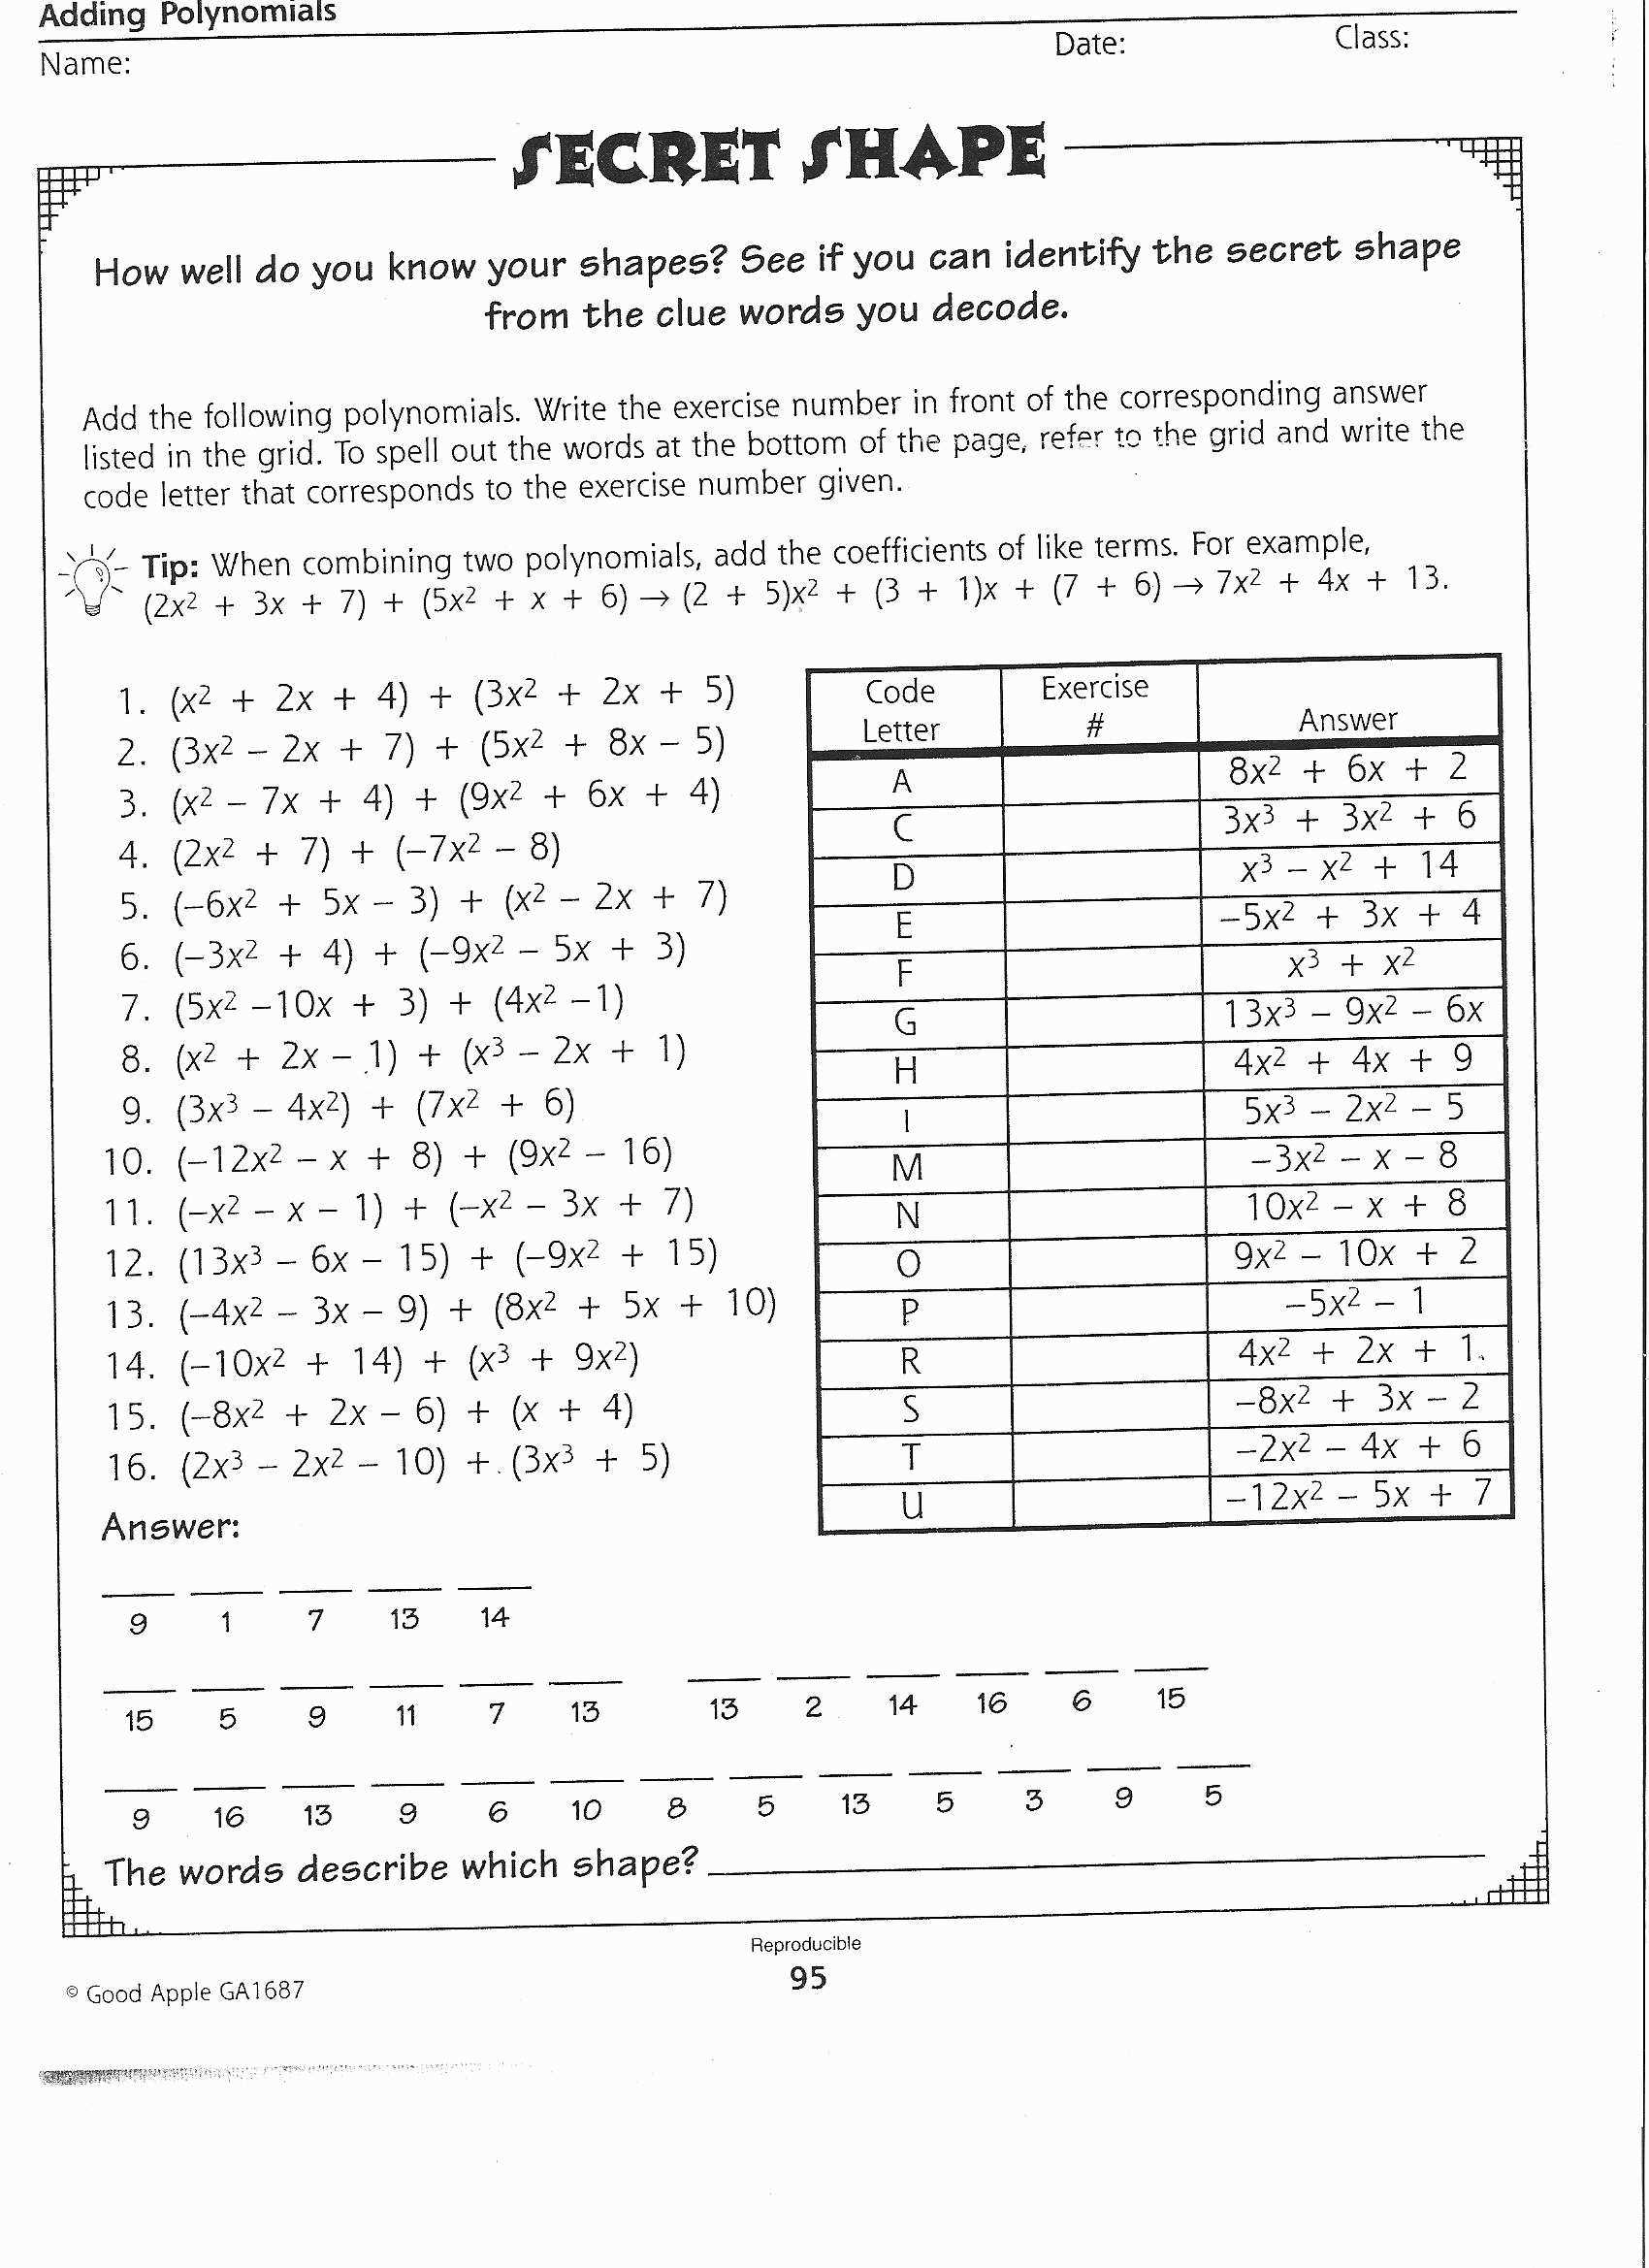 Theme Worksheet 4 as Well as 12 Awesome Worksheet for Kids